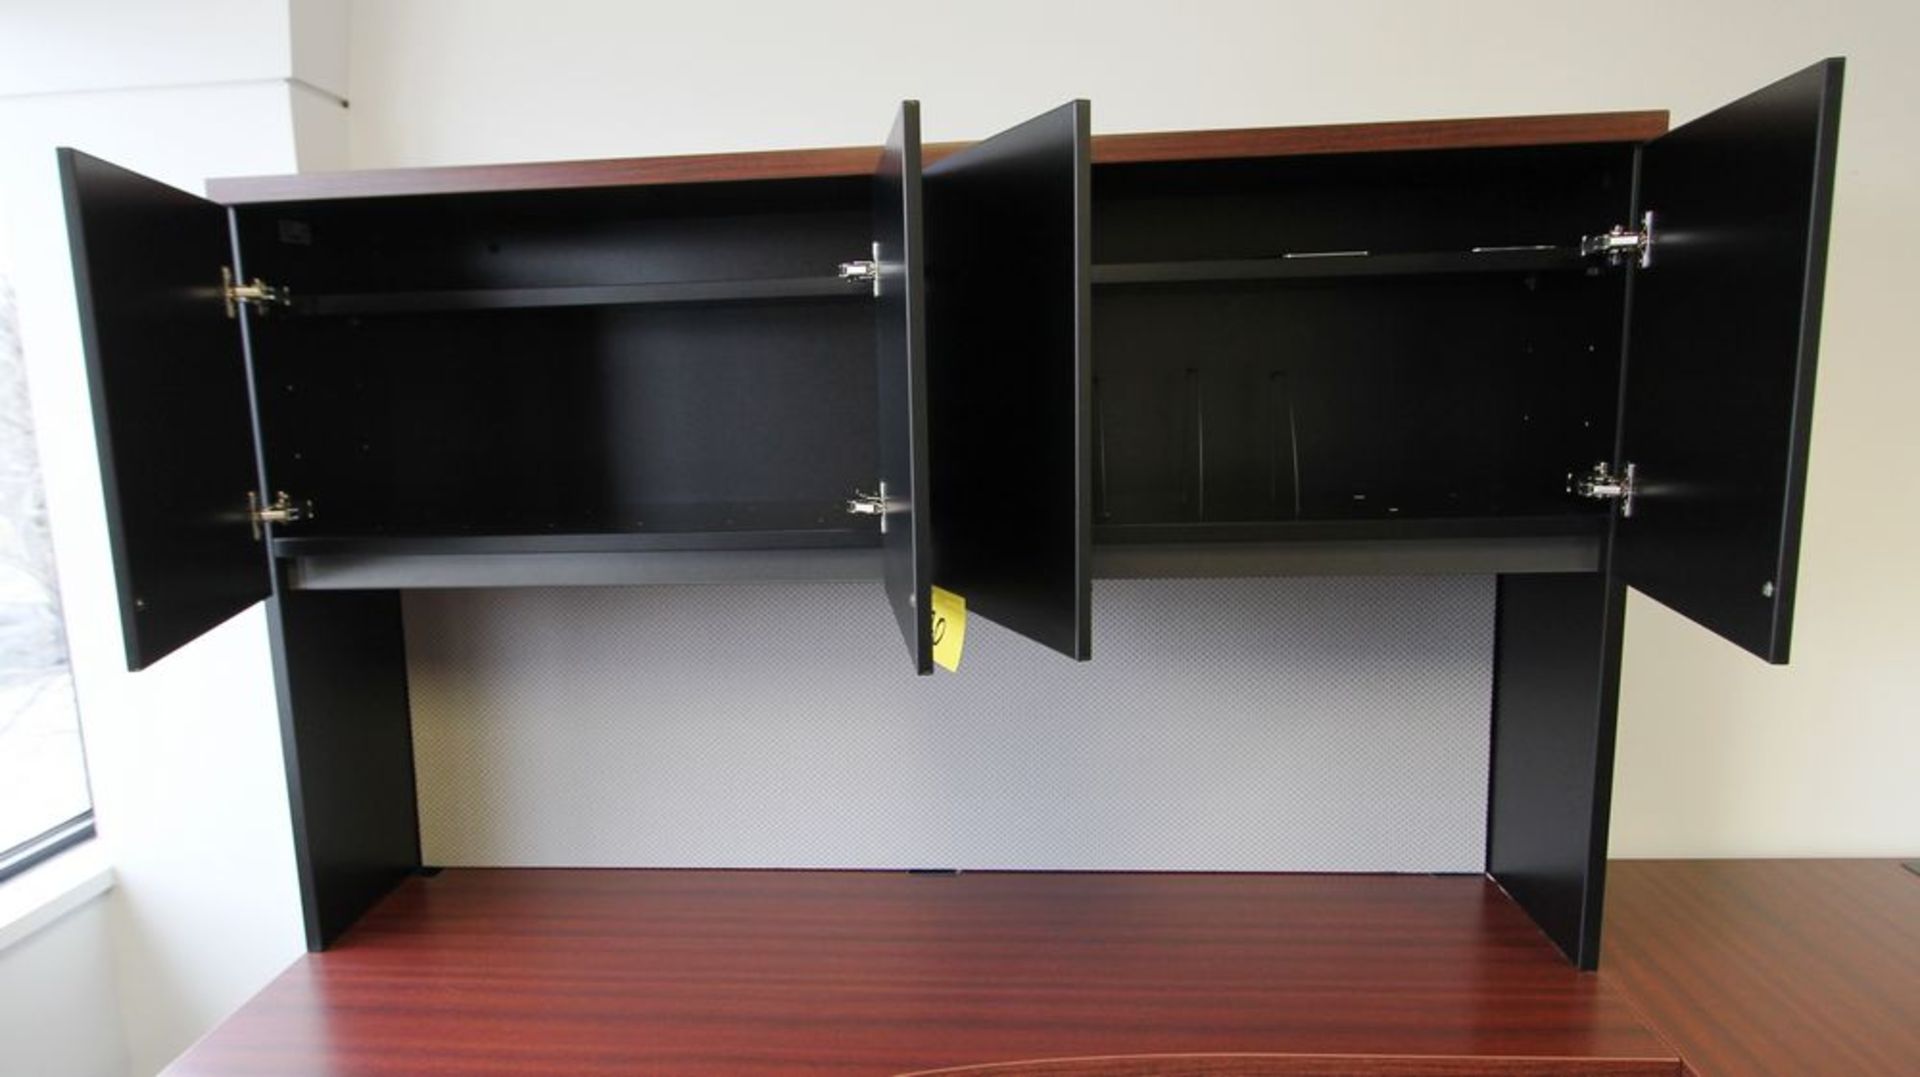 U-SHAPED DESK W/ OVERHEAD STORAGE, FILING CABINET AND MATCHING STORAGE CABINET - Image 3 of 6